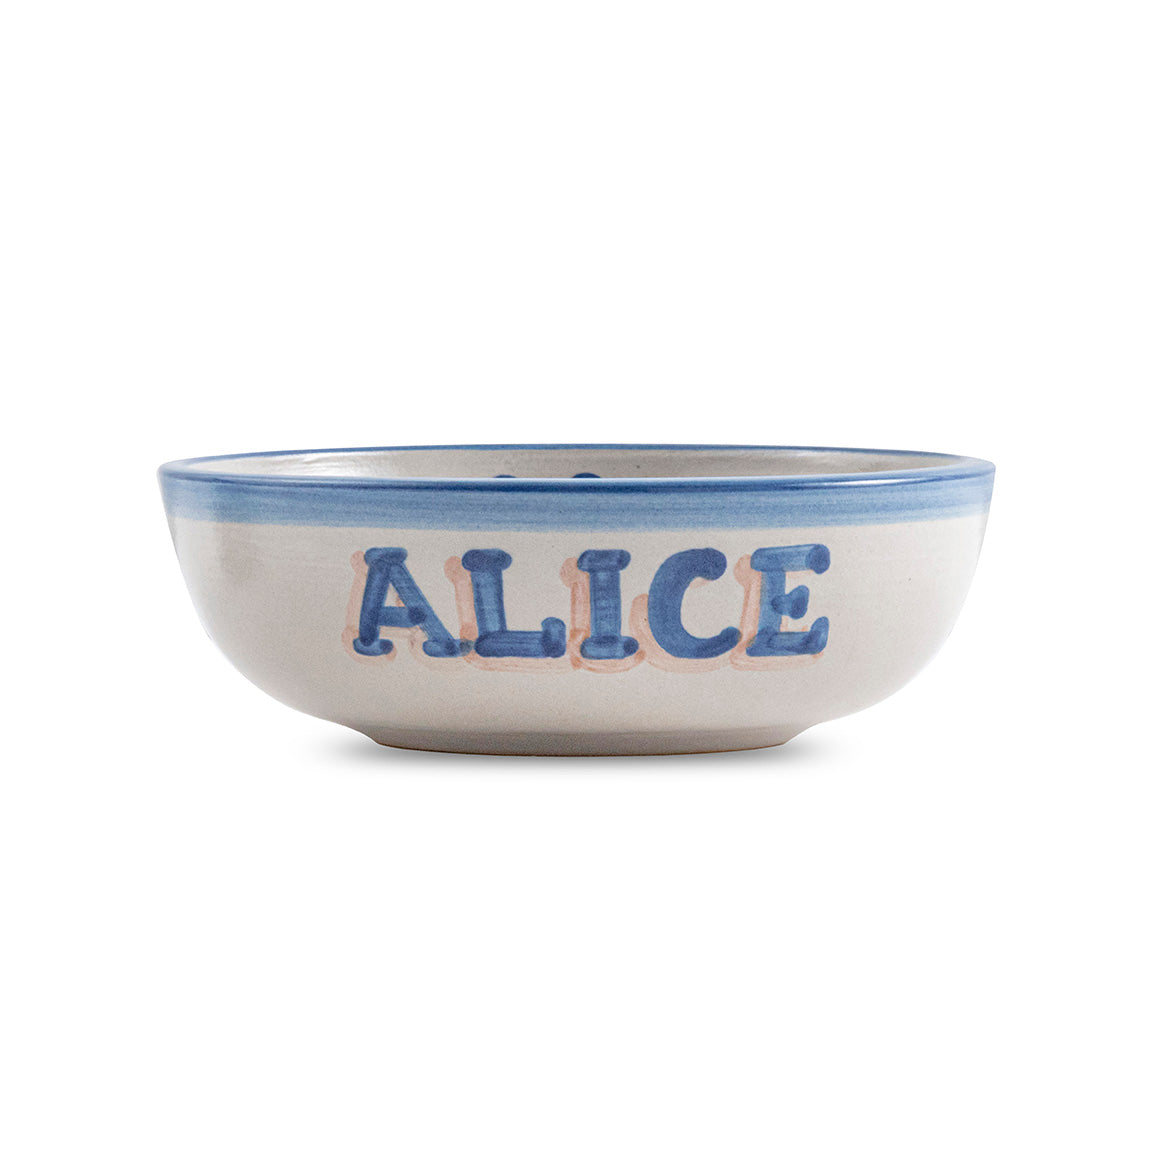 Personalized All Gone Bowl